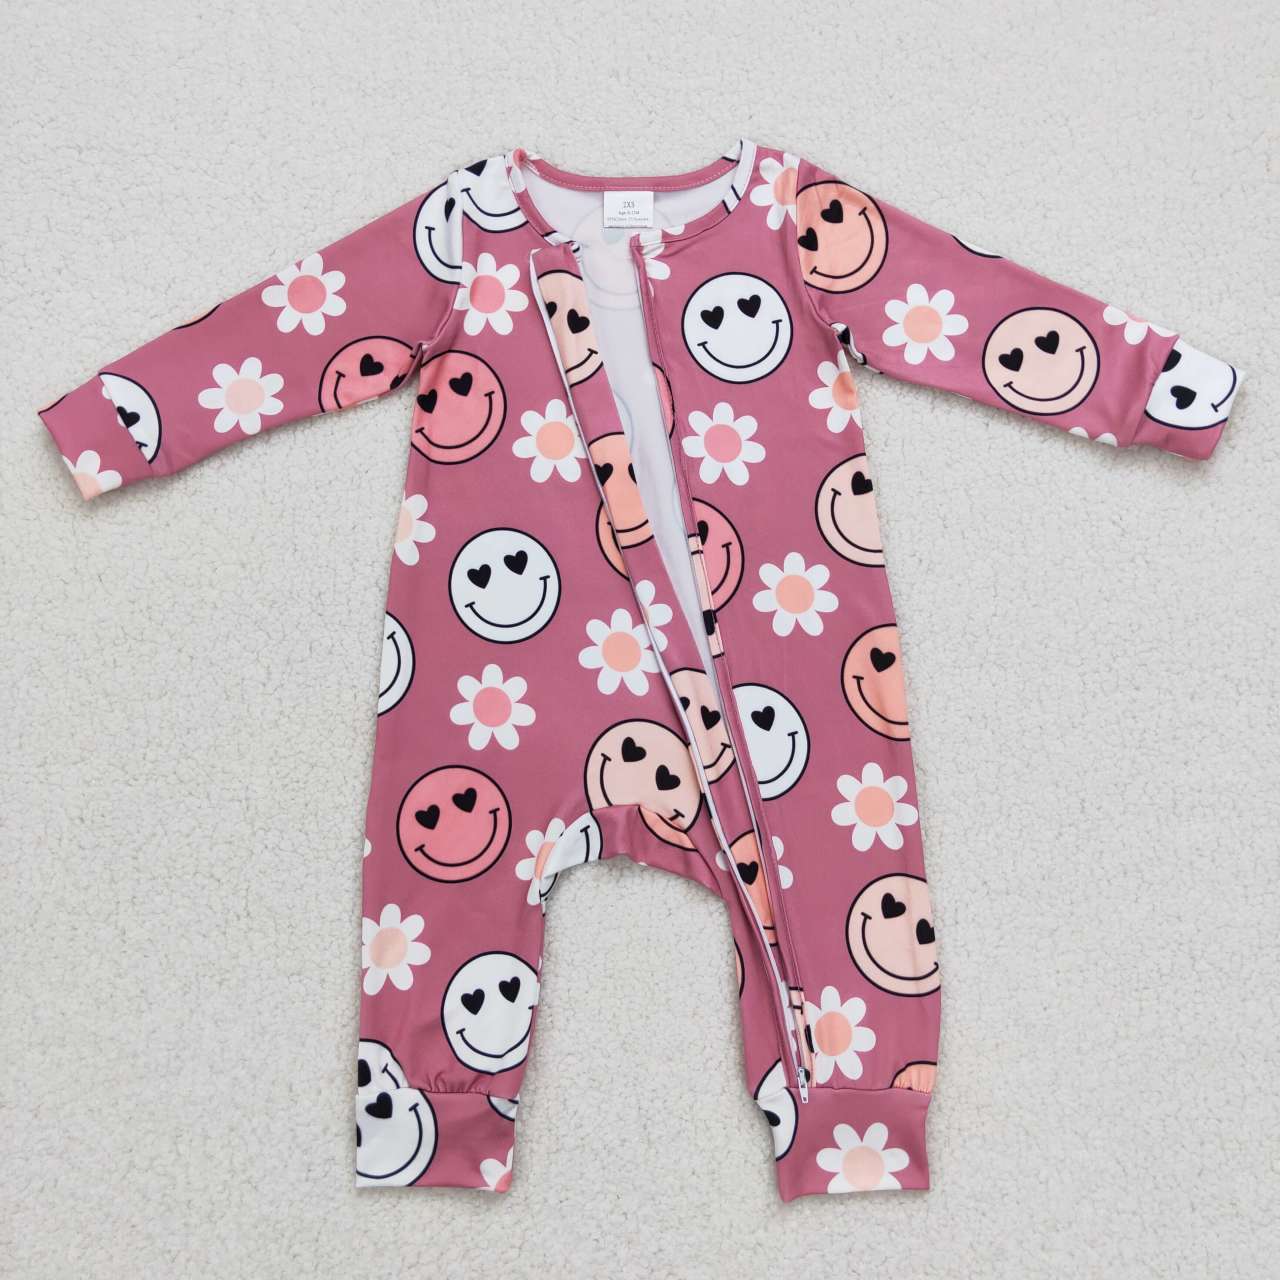 floral and smiley print baby girls sleeper